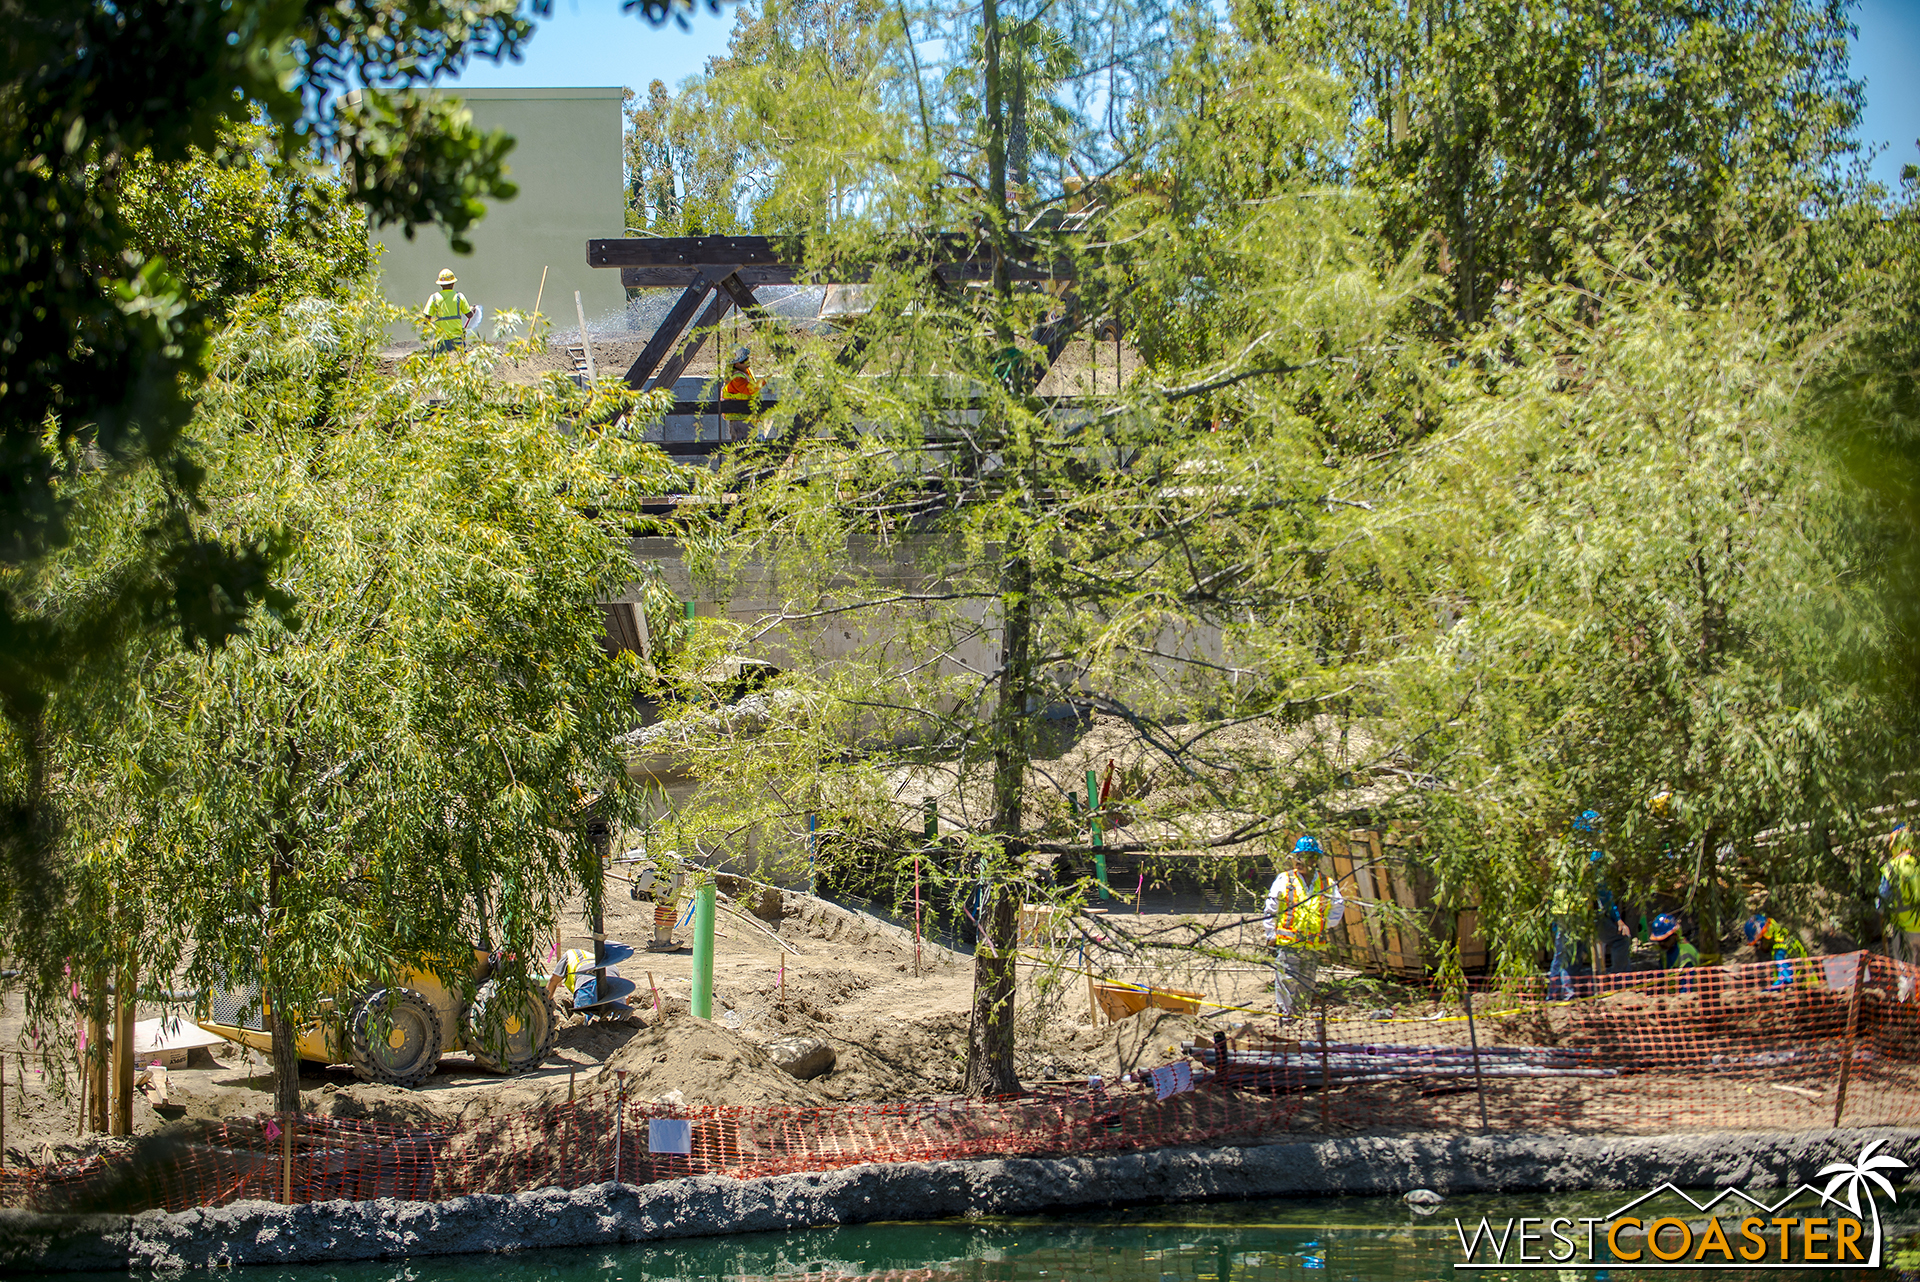  This series is moving "southward" from the interior of the Rivers of America toward Critter Country, so you can see a glimpse of that truss bridge again. 